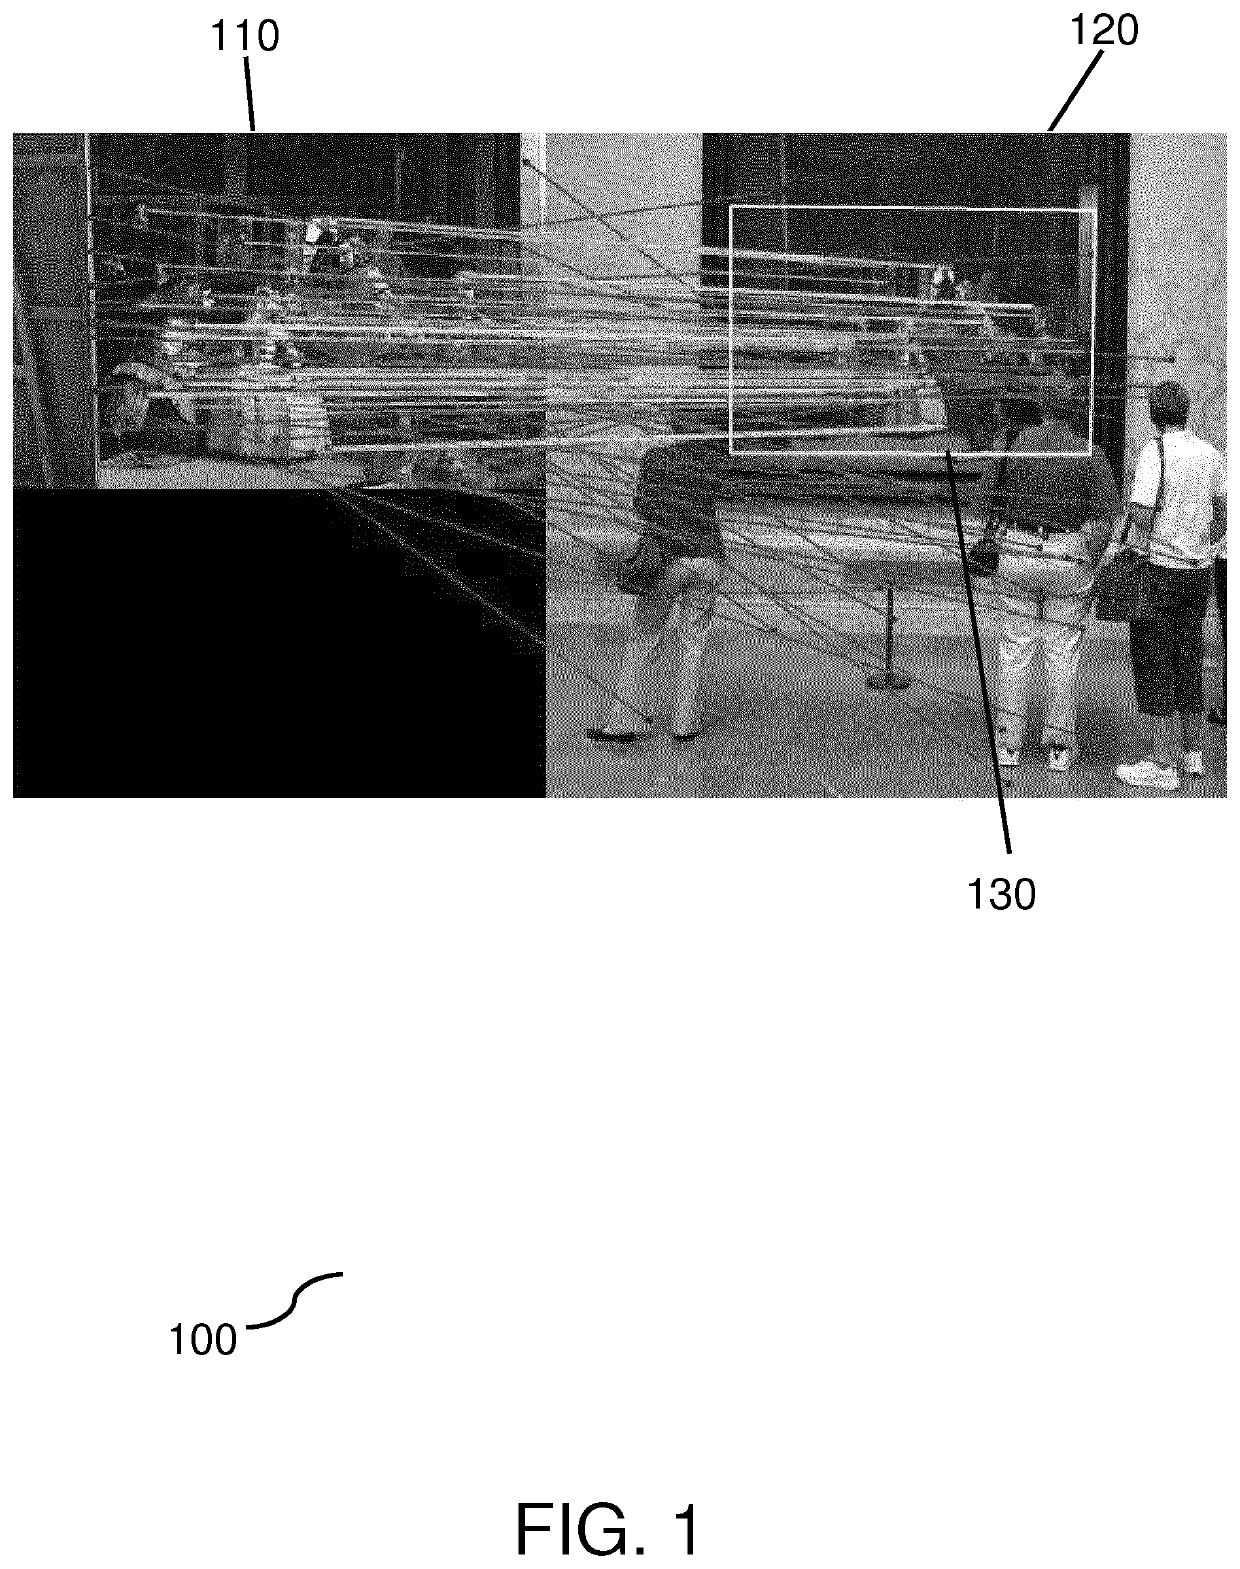 Localization of planar objects in images bearing repetitive patterns